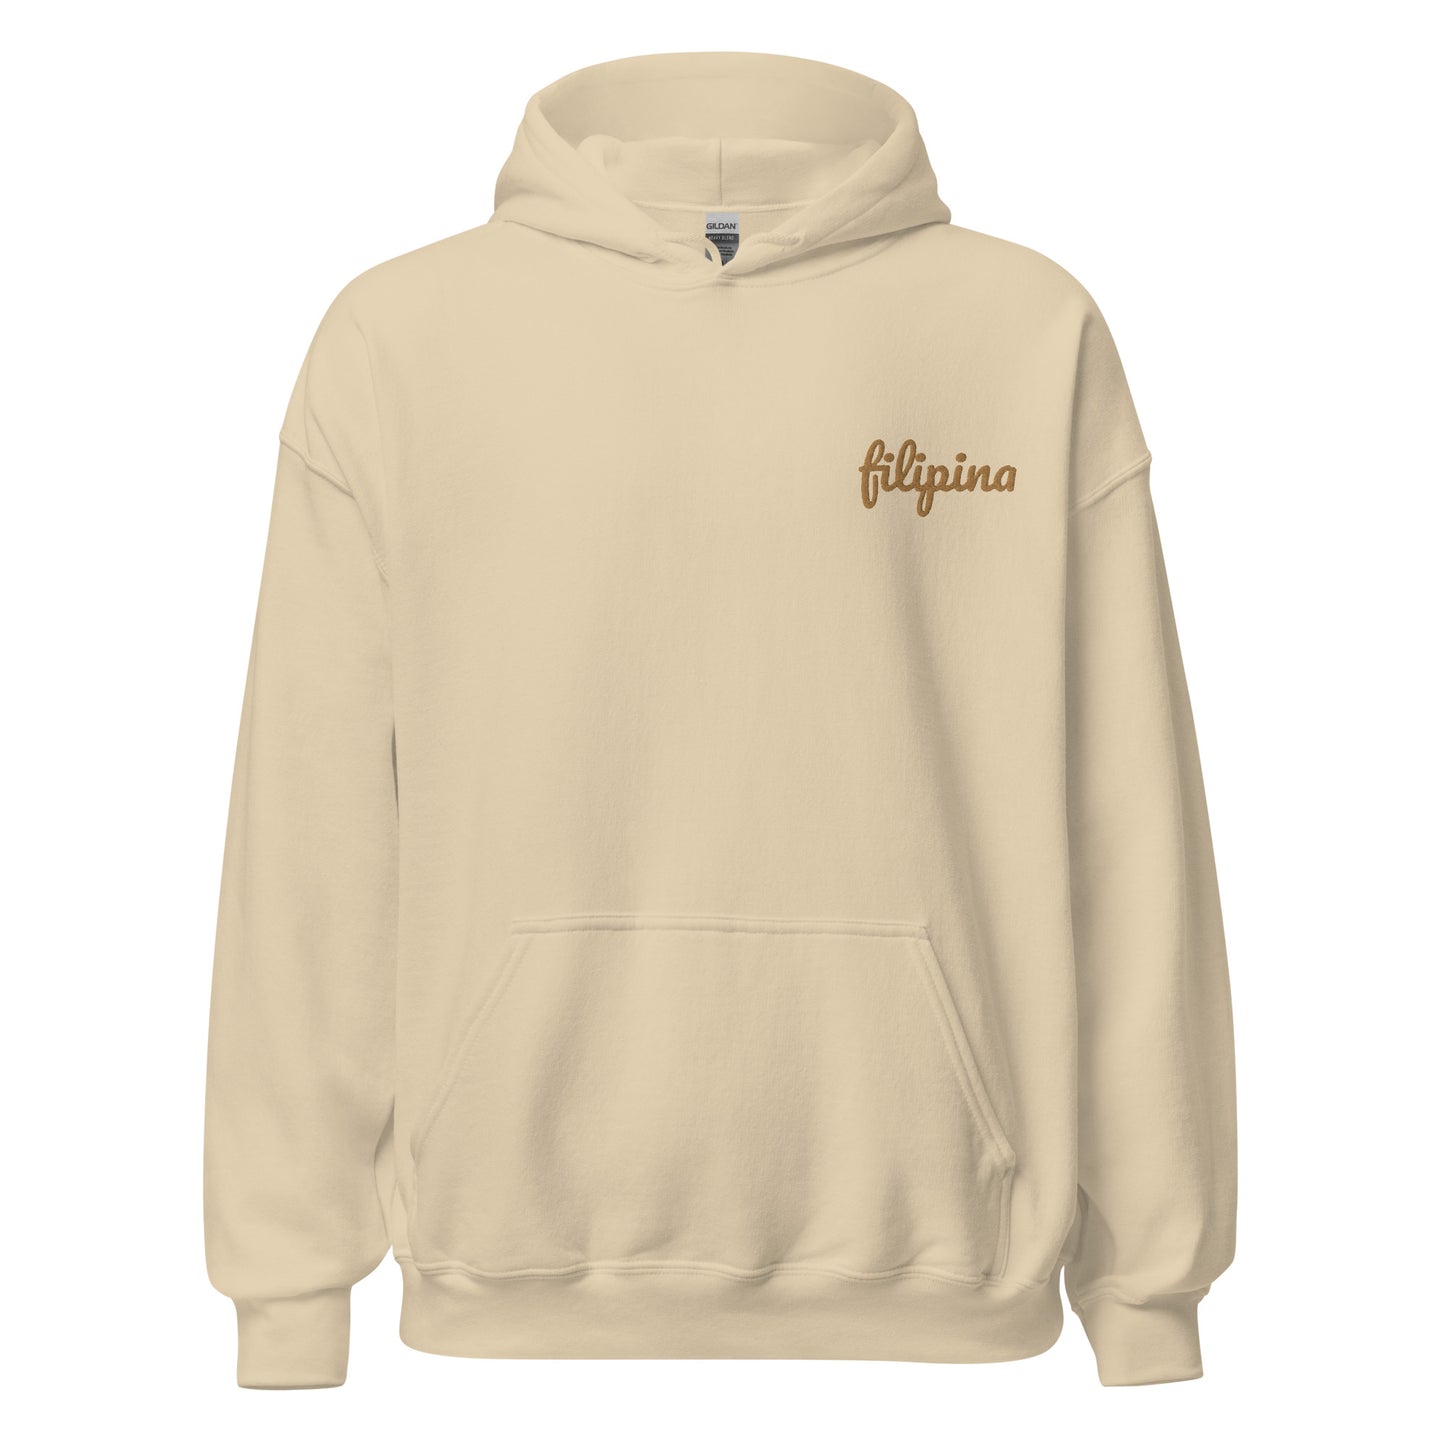 Filipino Hoodie Filipina Statement Embroidered Merch in color variant Sand